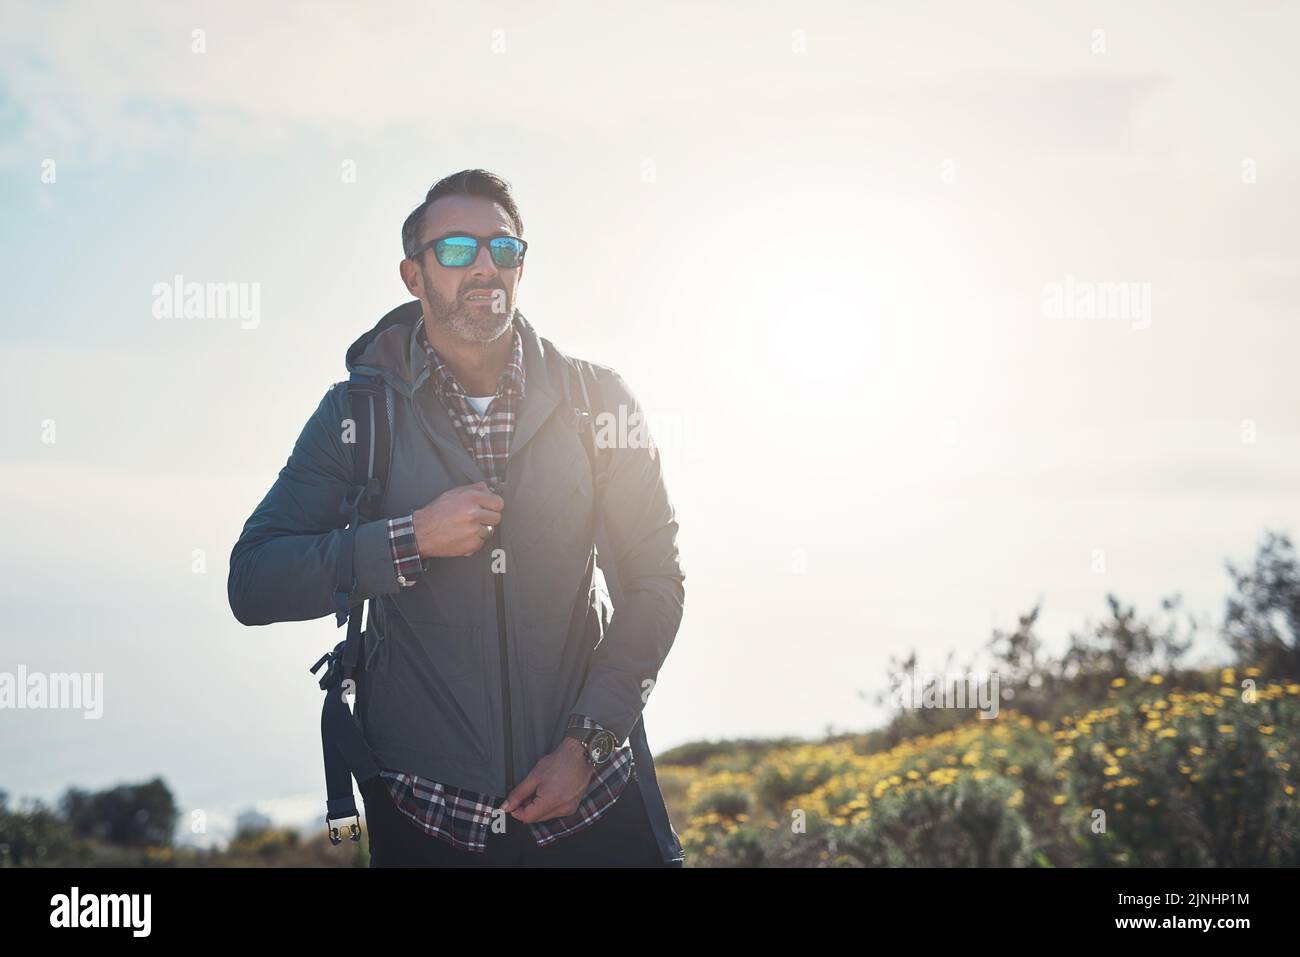 Zip up and keep going. a middle aged man hiking in the mountains. Stock Photo